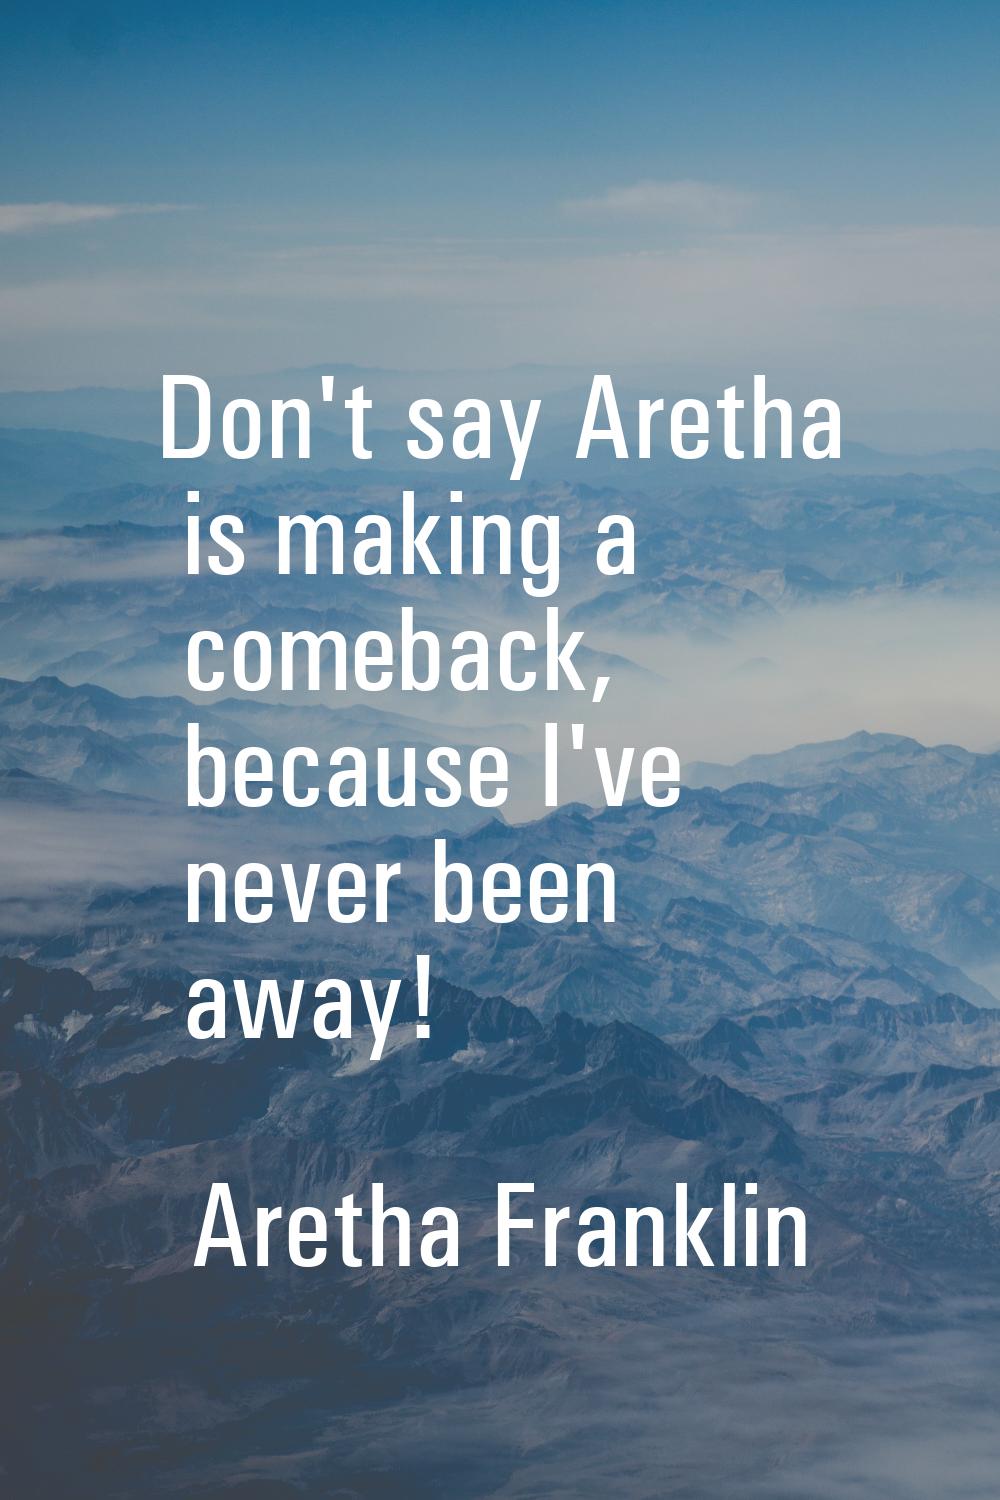 Don't say Aretha is making a comeback, because I've never been away!